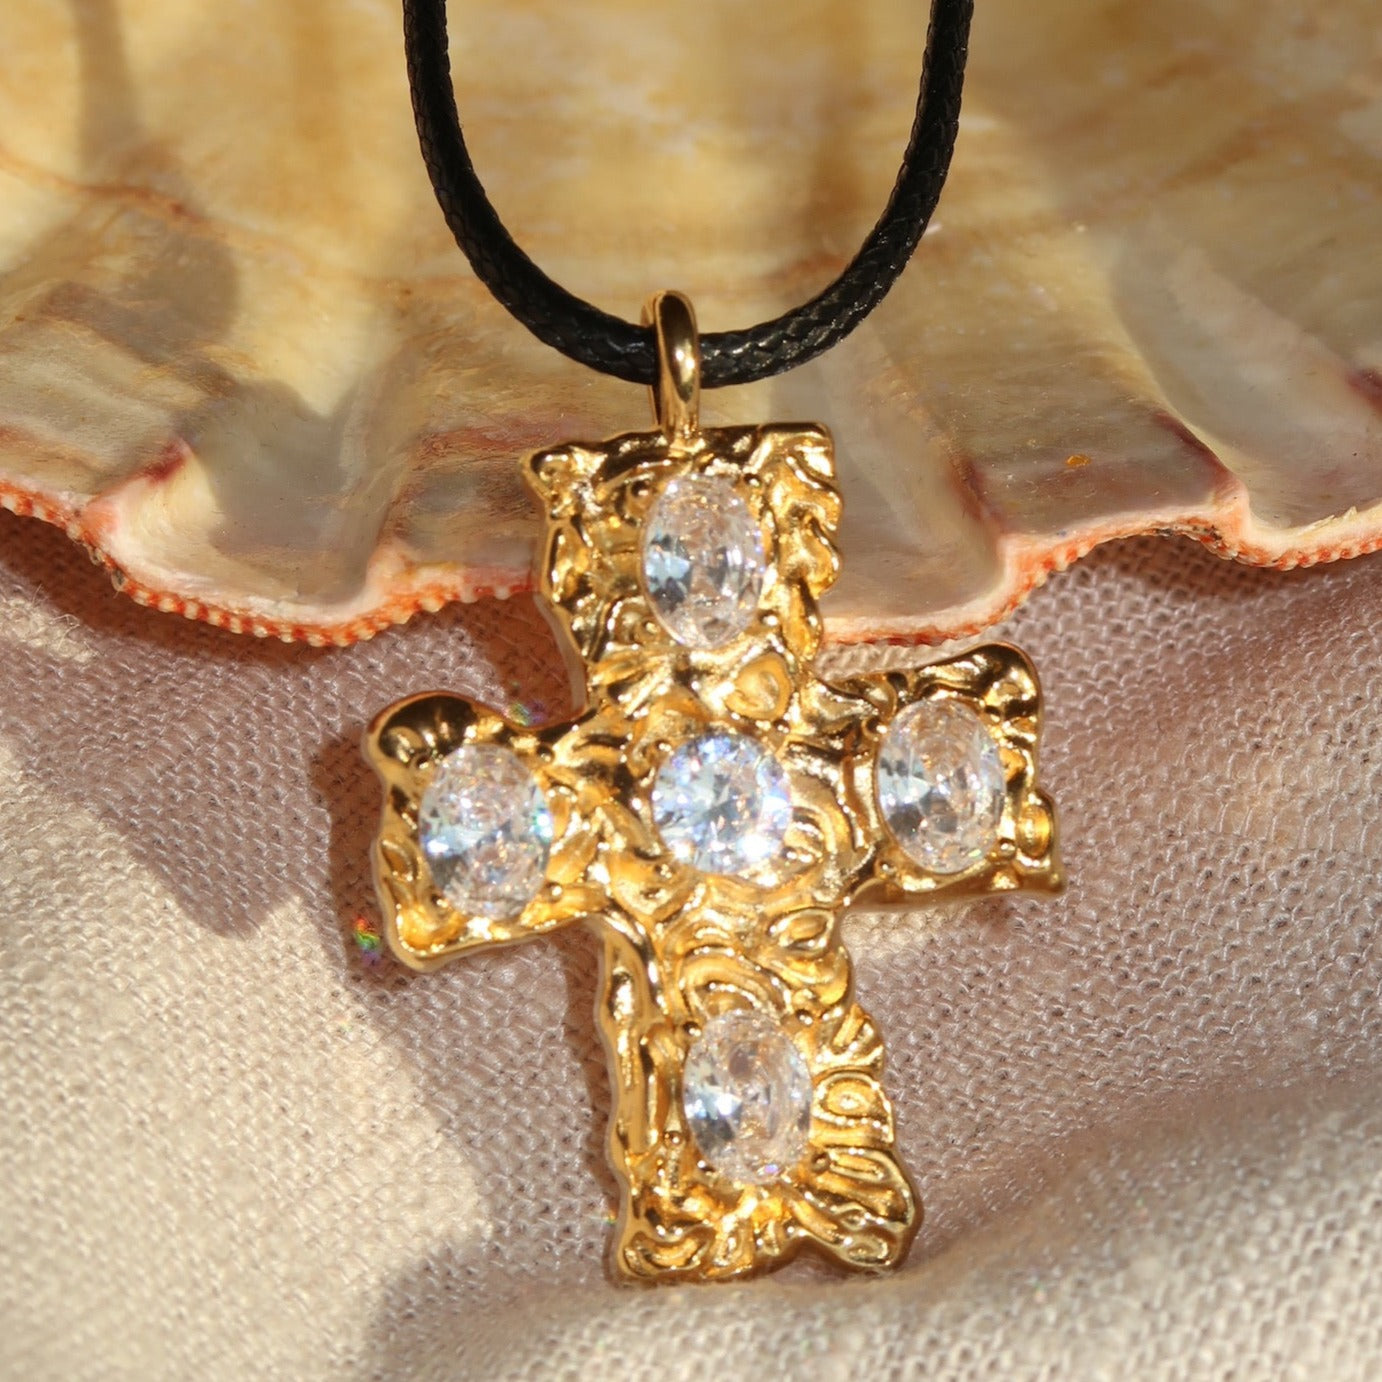 LAURA - 18K PVD Gold Plated Cross Necklace with Oval Shaped Stones - Mixed Metals